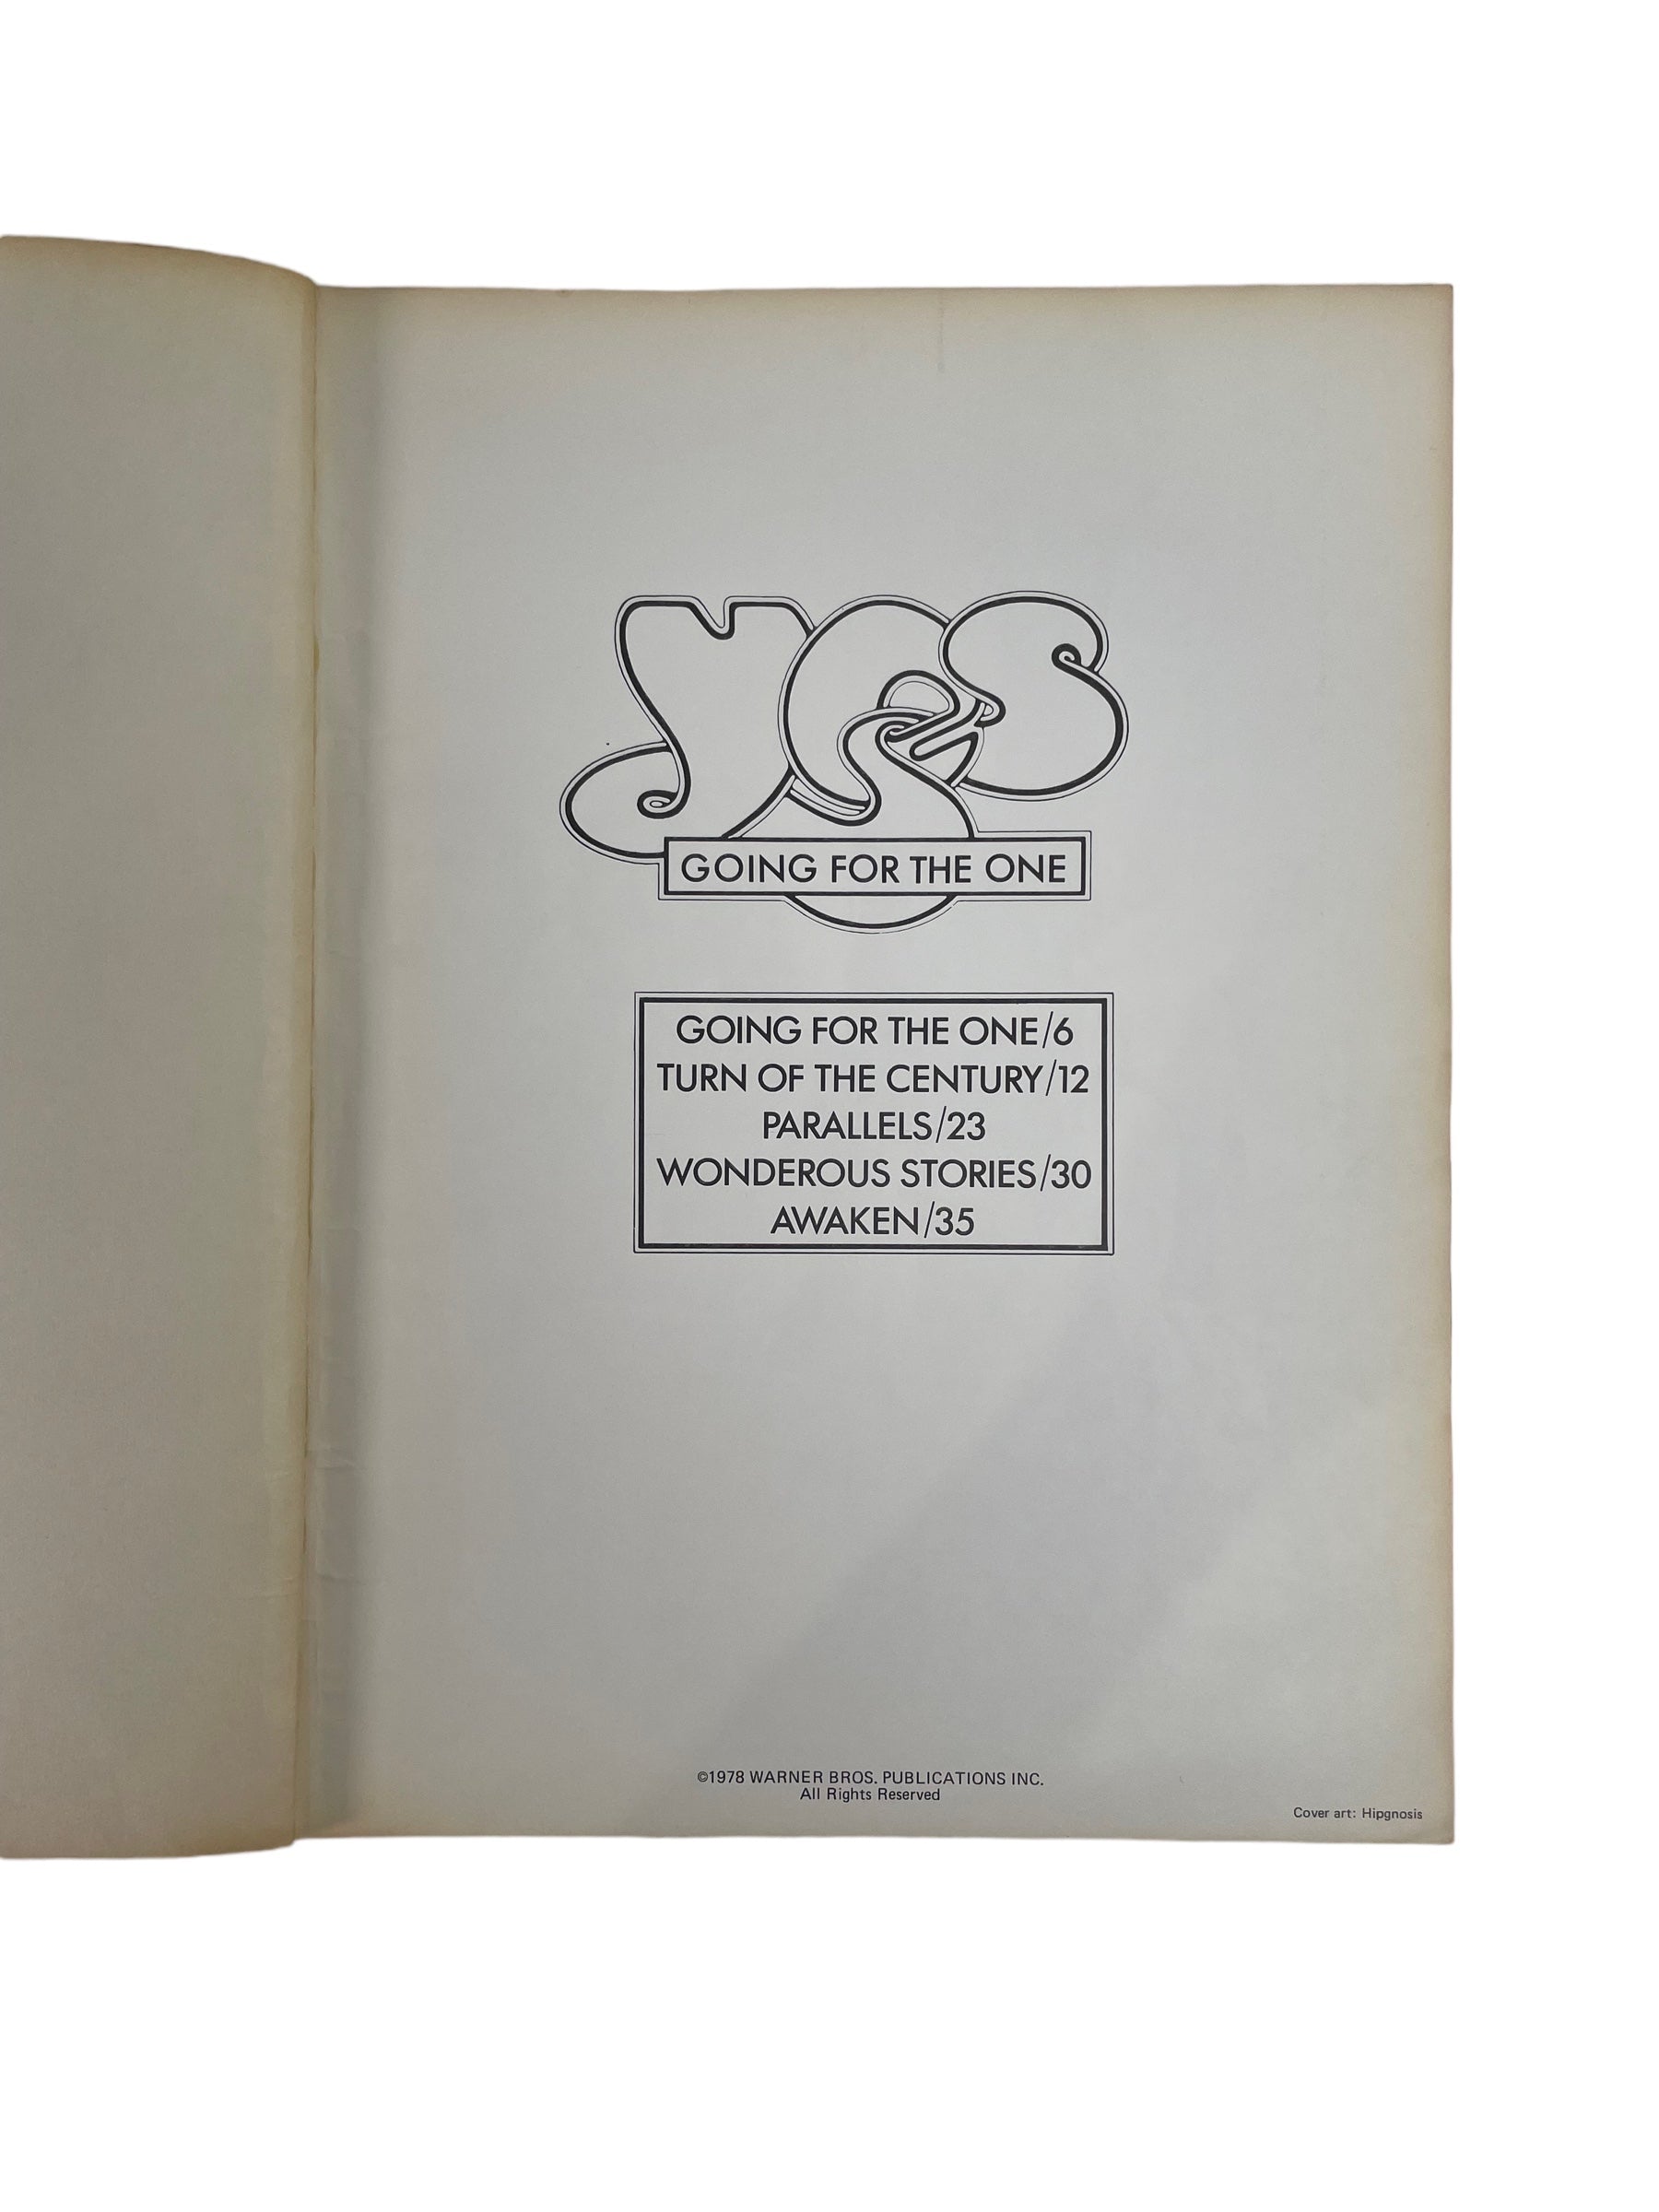 Lot of two Yes Sheet Music Songbooks featuring "Yes- Going For the One" (1978) and "Yes Tormato" (1979)